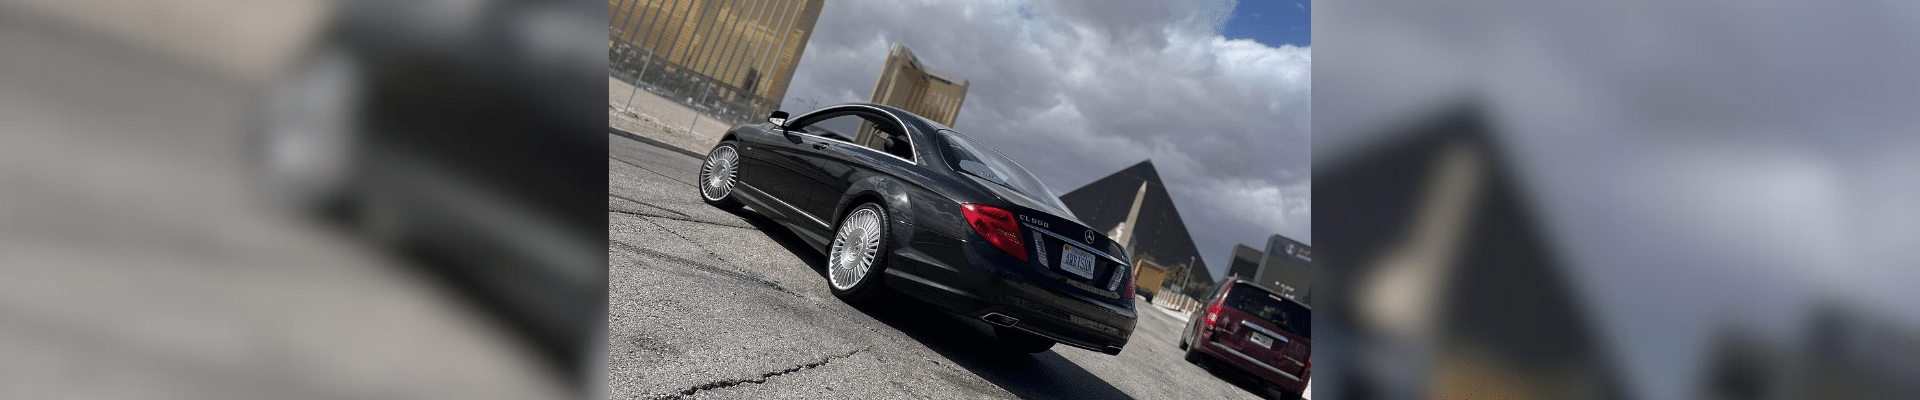 Mercedes-Benz-CL550-Gallery-img-2.png